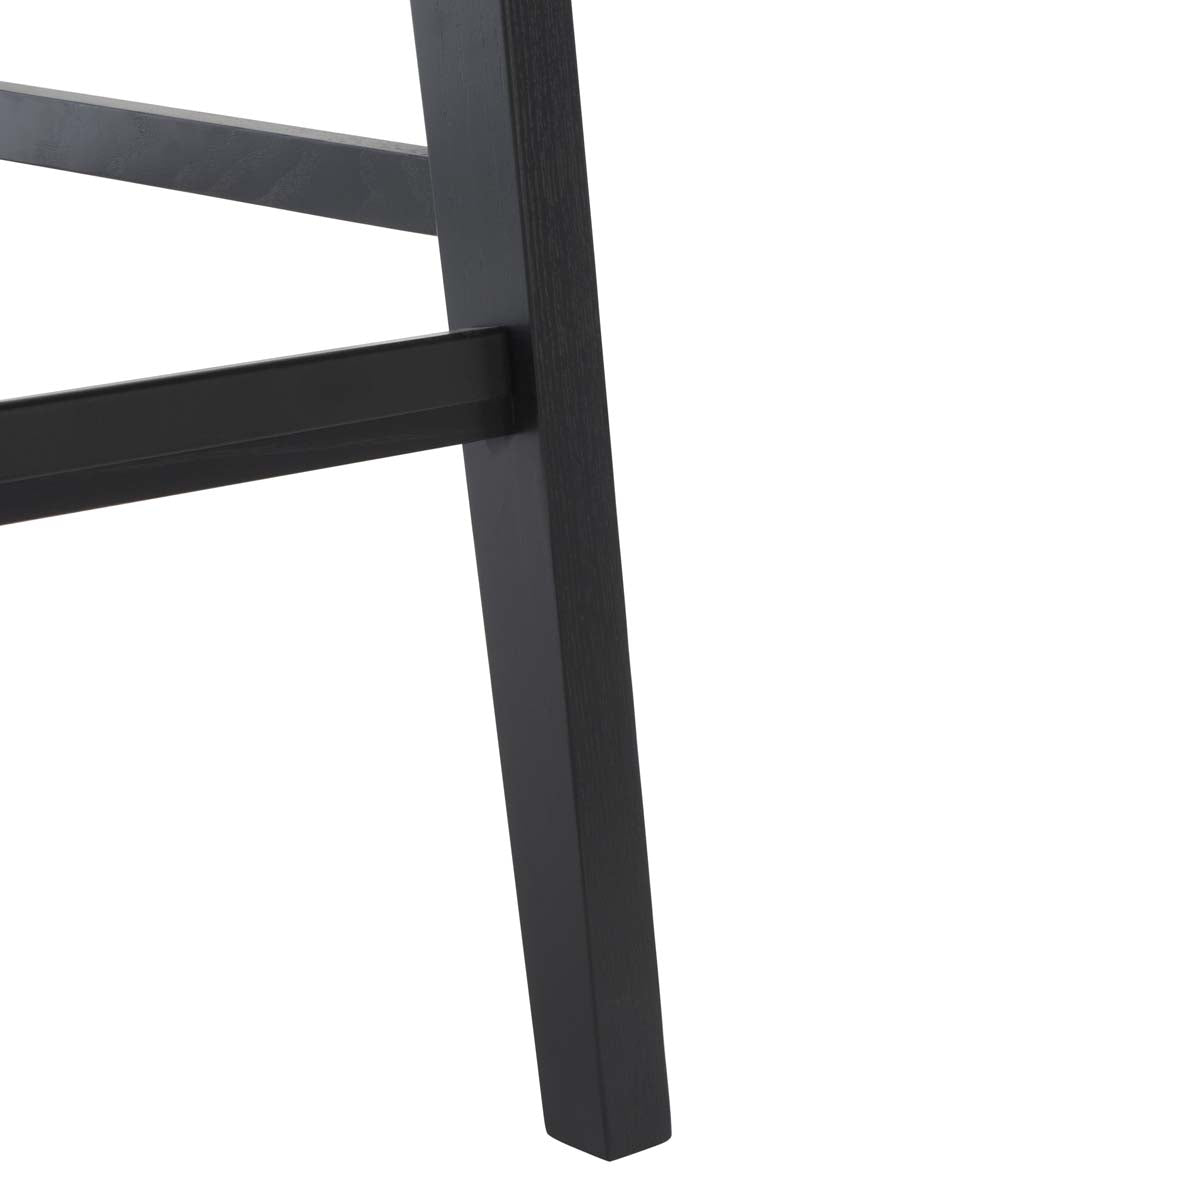 Safavieh Couture Hattie French Cane Barstool - Black / Natural